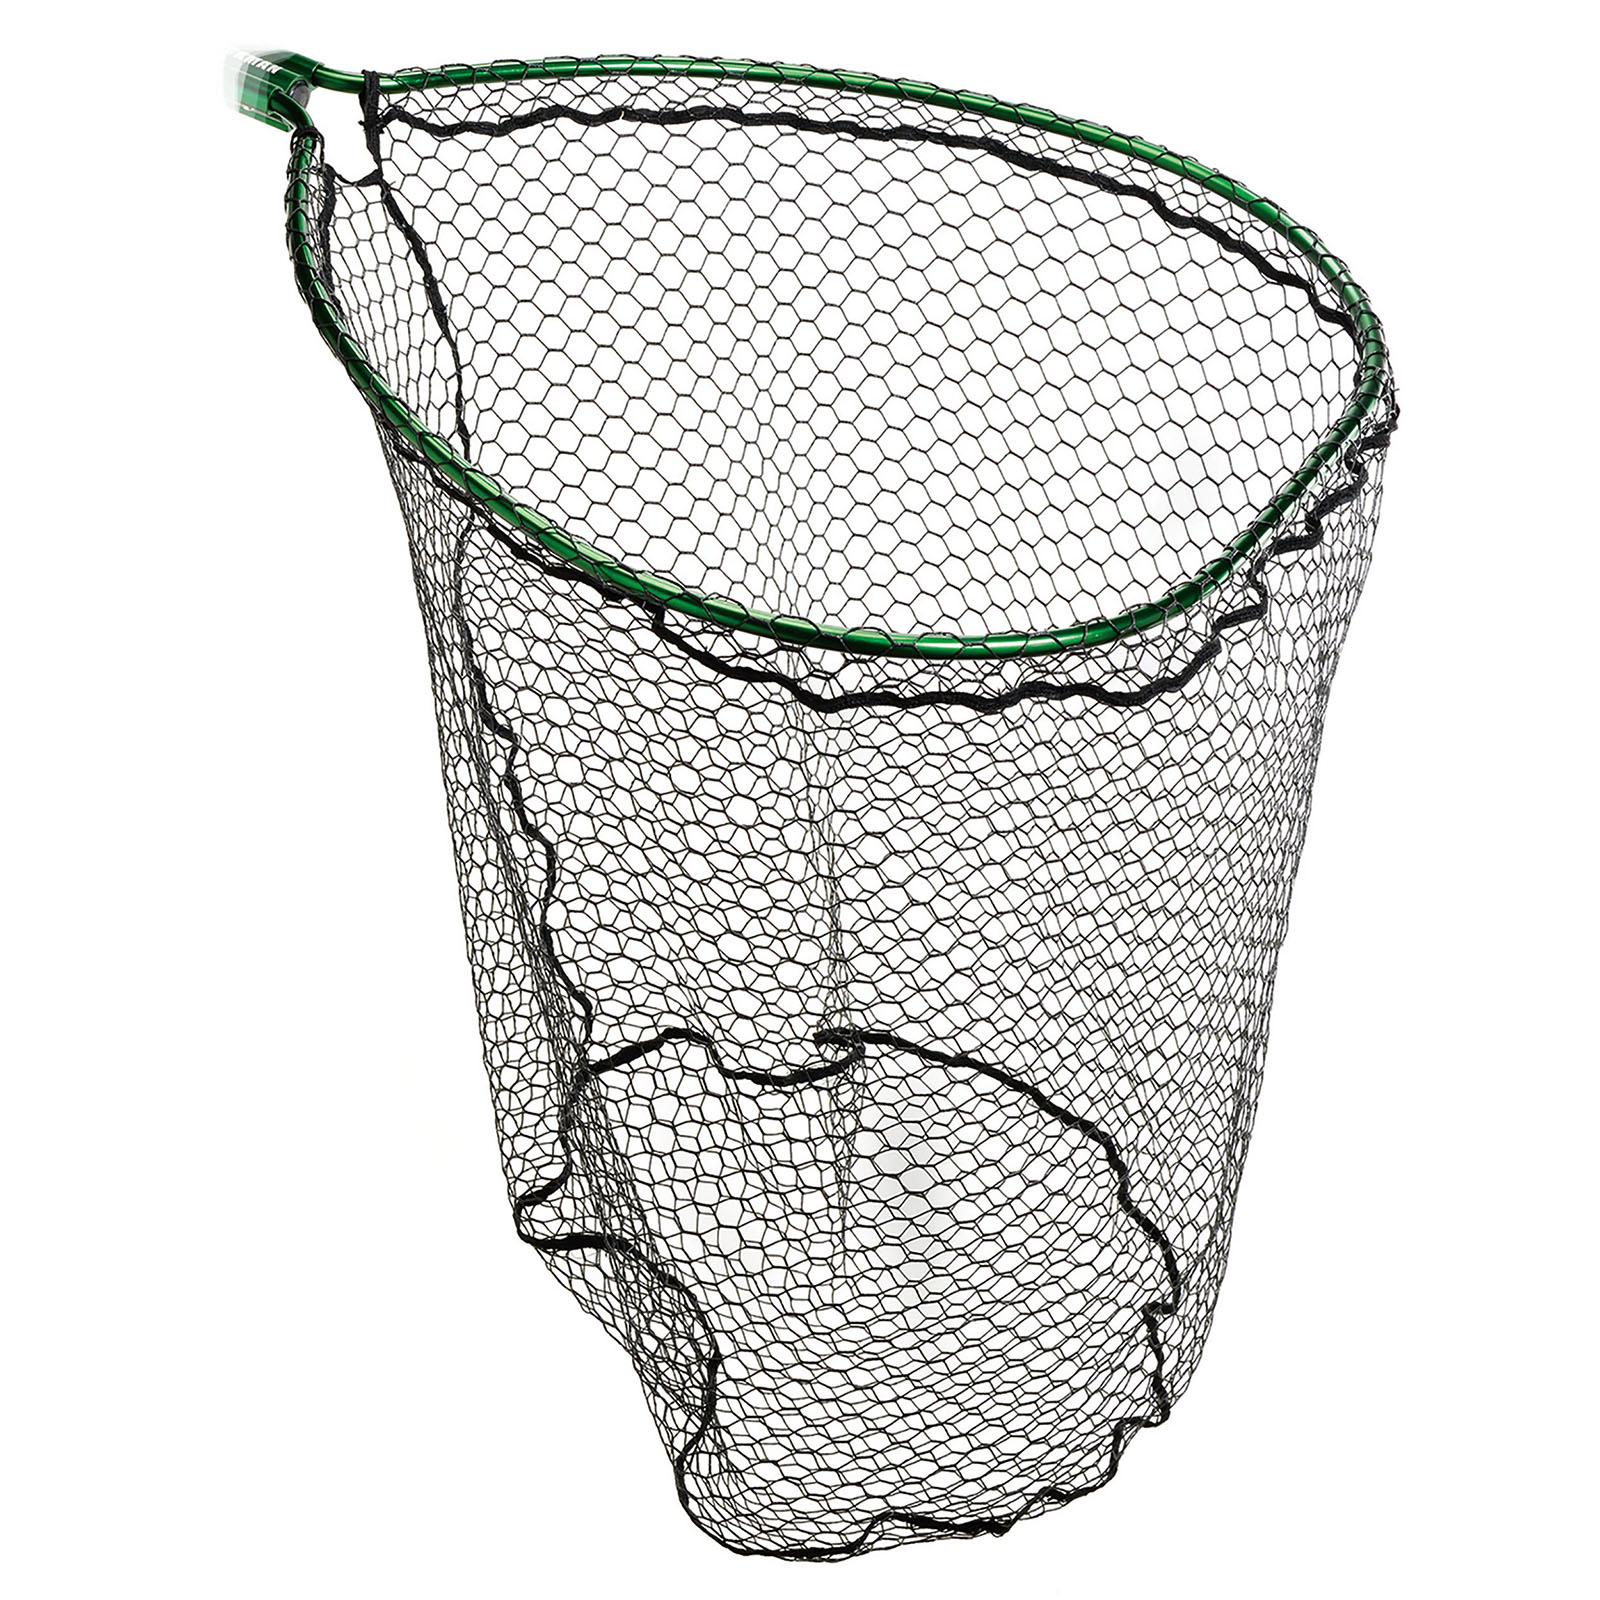 Beckman Replacement Net 32in x 44in Coated /RN3244C